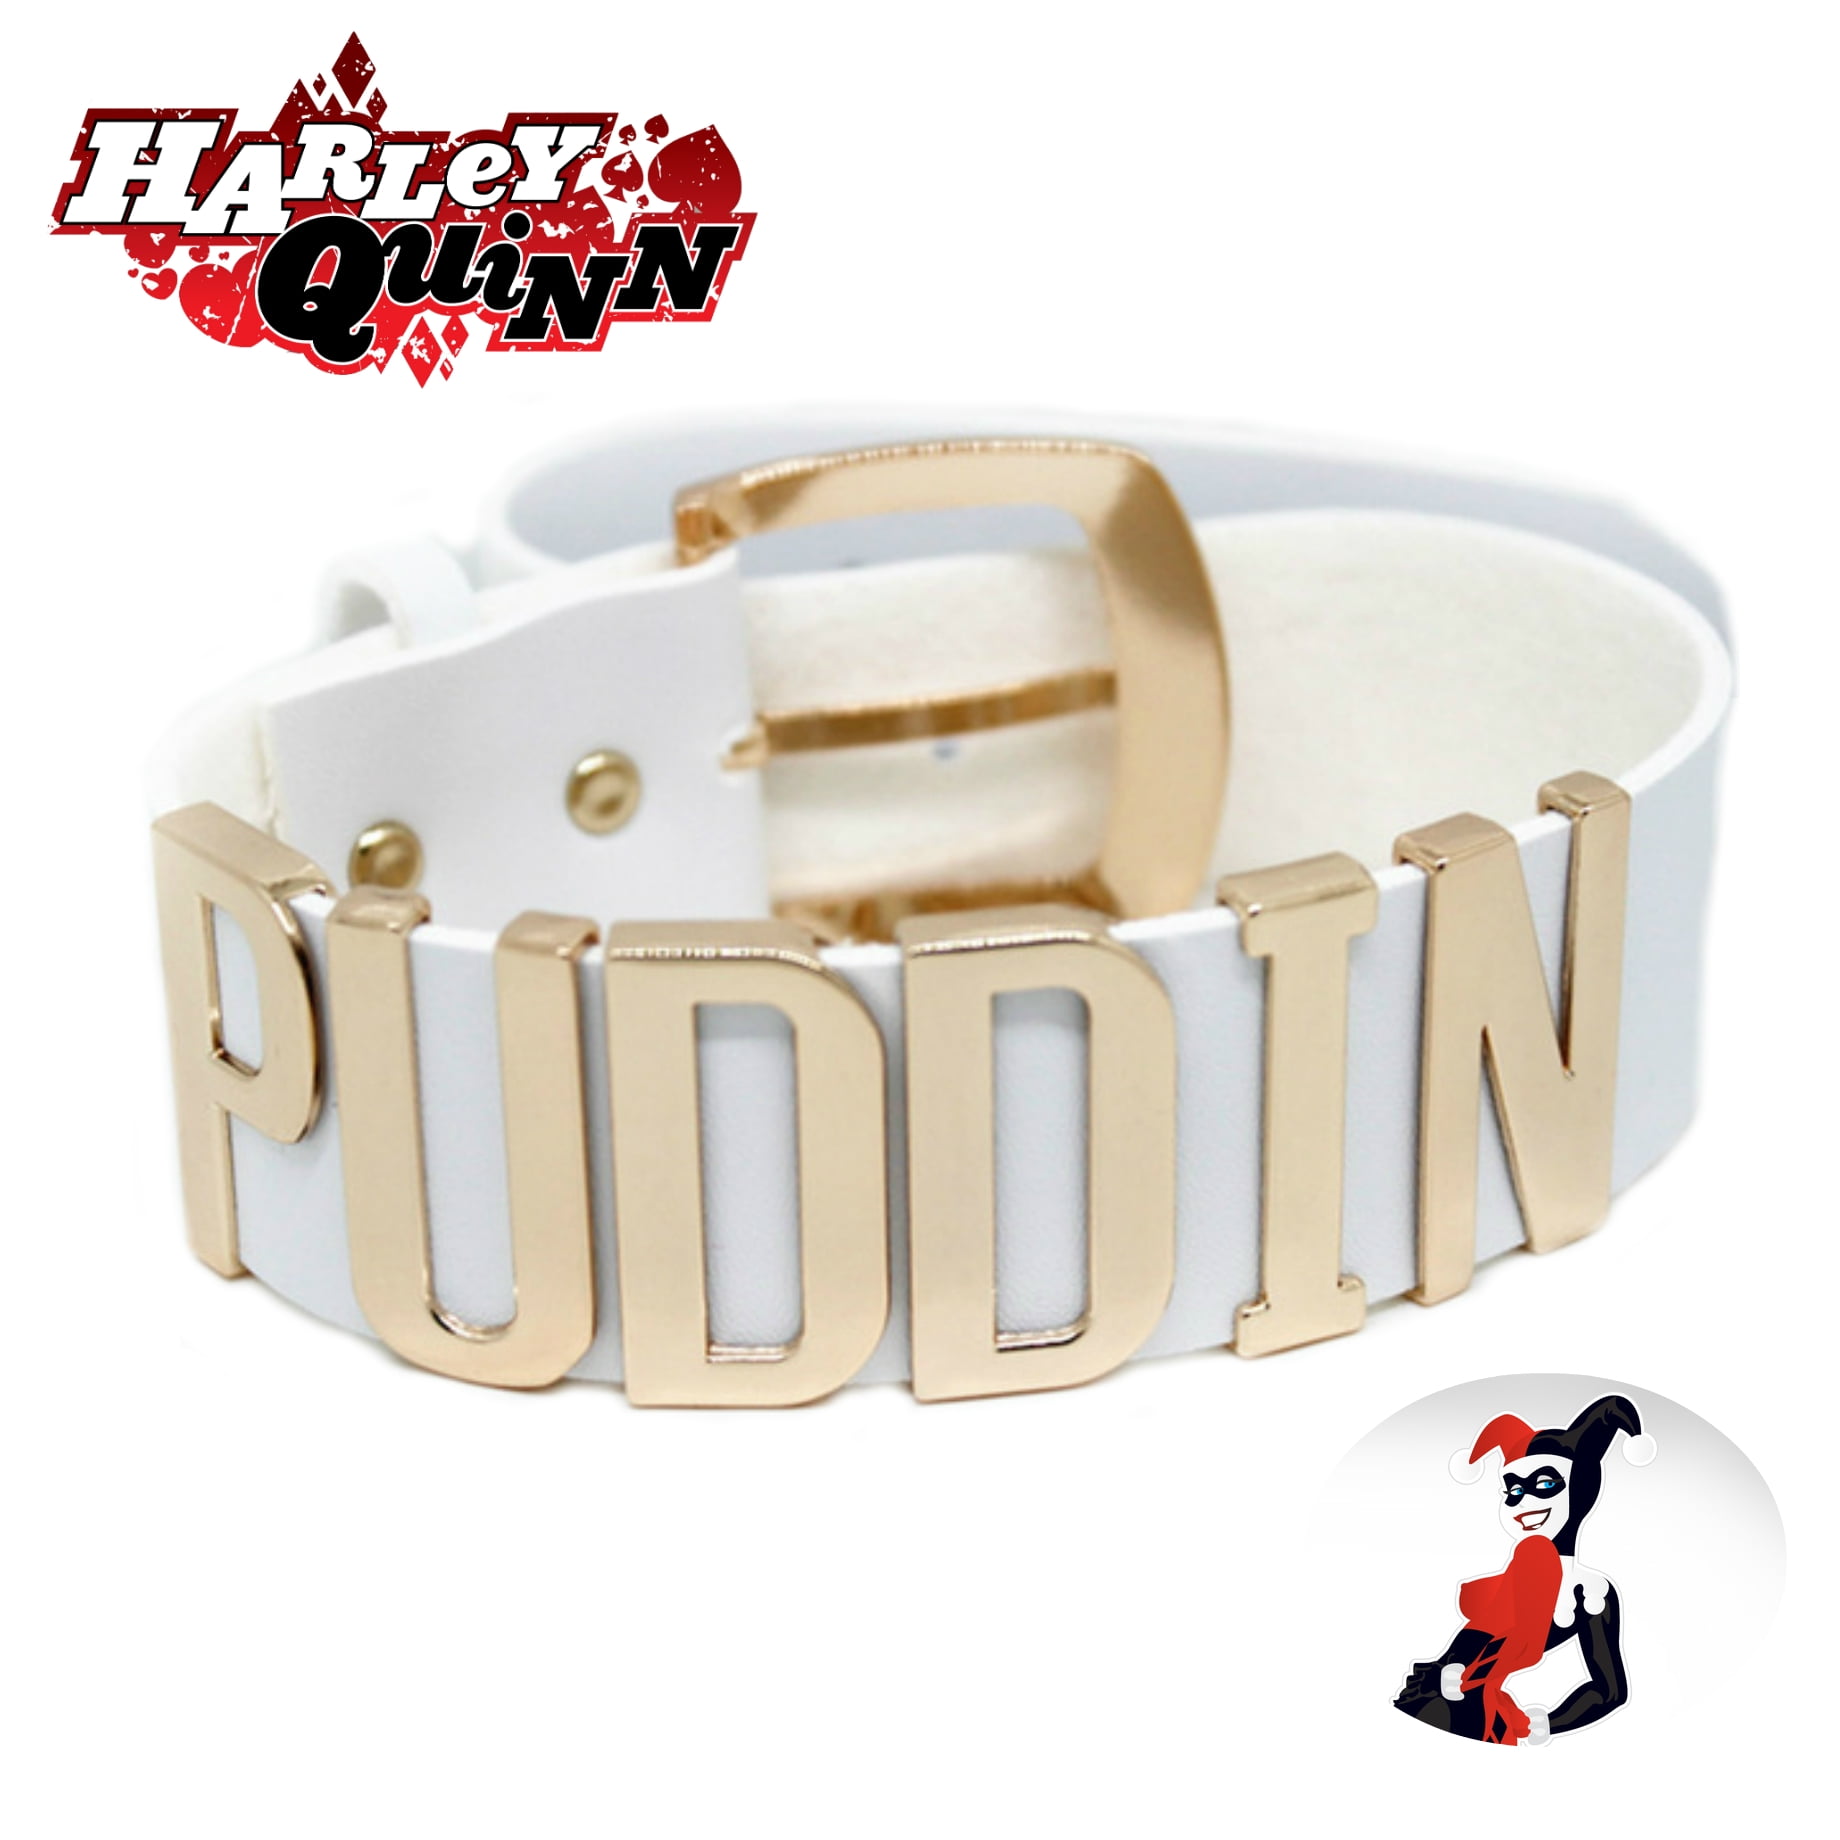 Productiecentrum hobby Componist DC Comics Harley Quinn Choker Necklace - Puddin - Movies TV Series Cosplay  Jewelry by Superheroes - Walmart.com